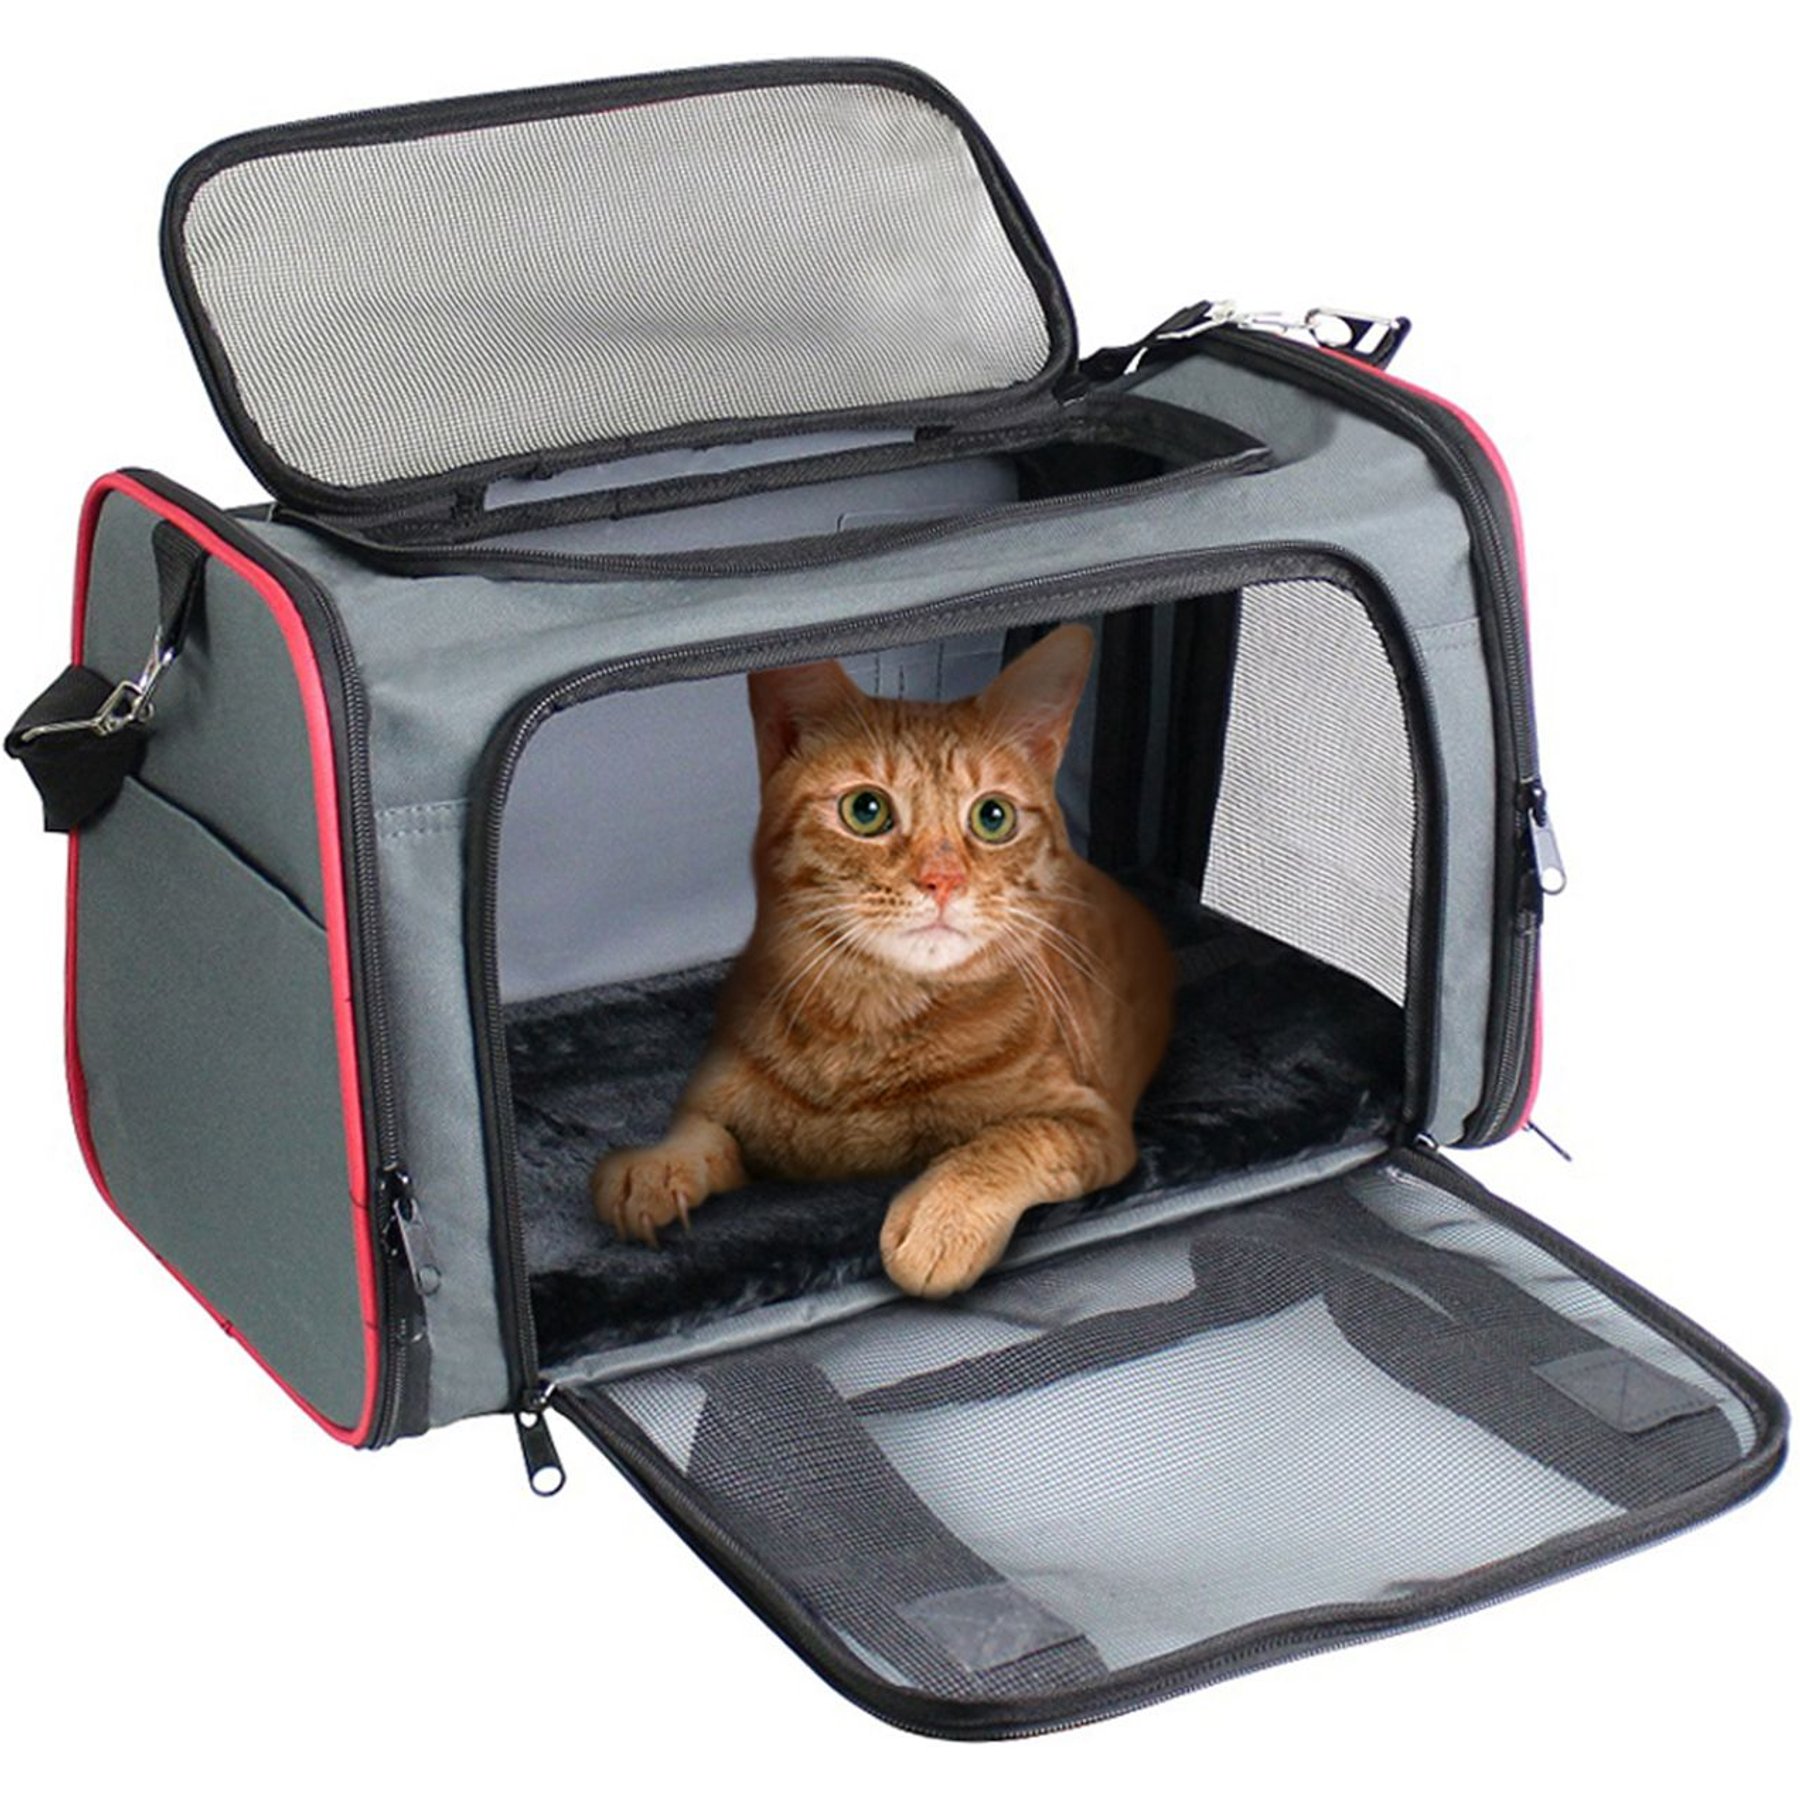 Soft Pet Carrier Large Medium Cats 2 Kitties Small Dogs Easy to